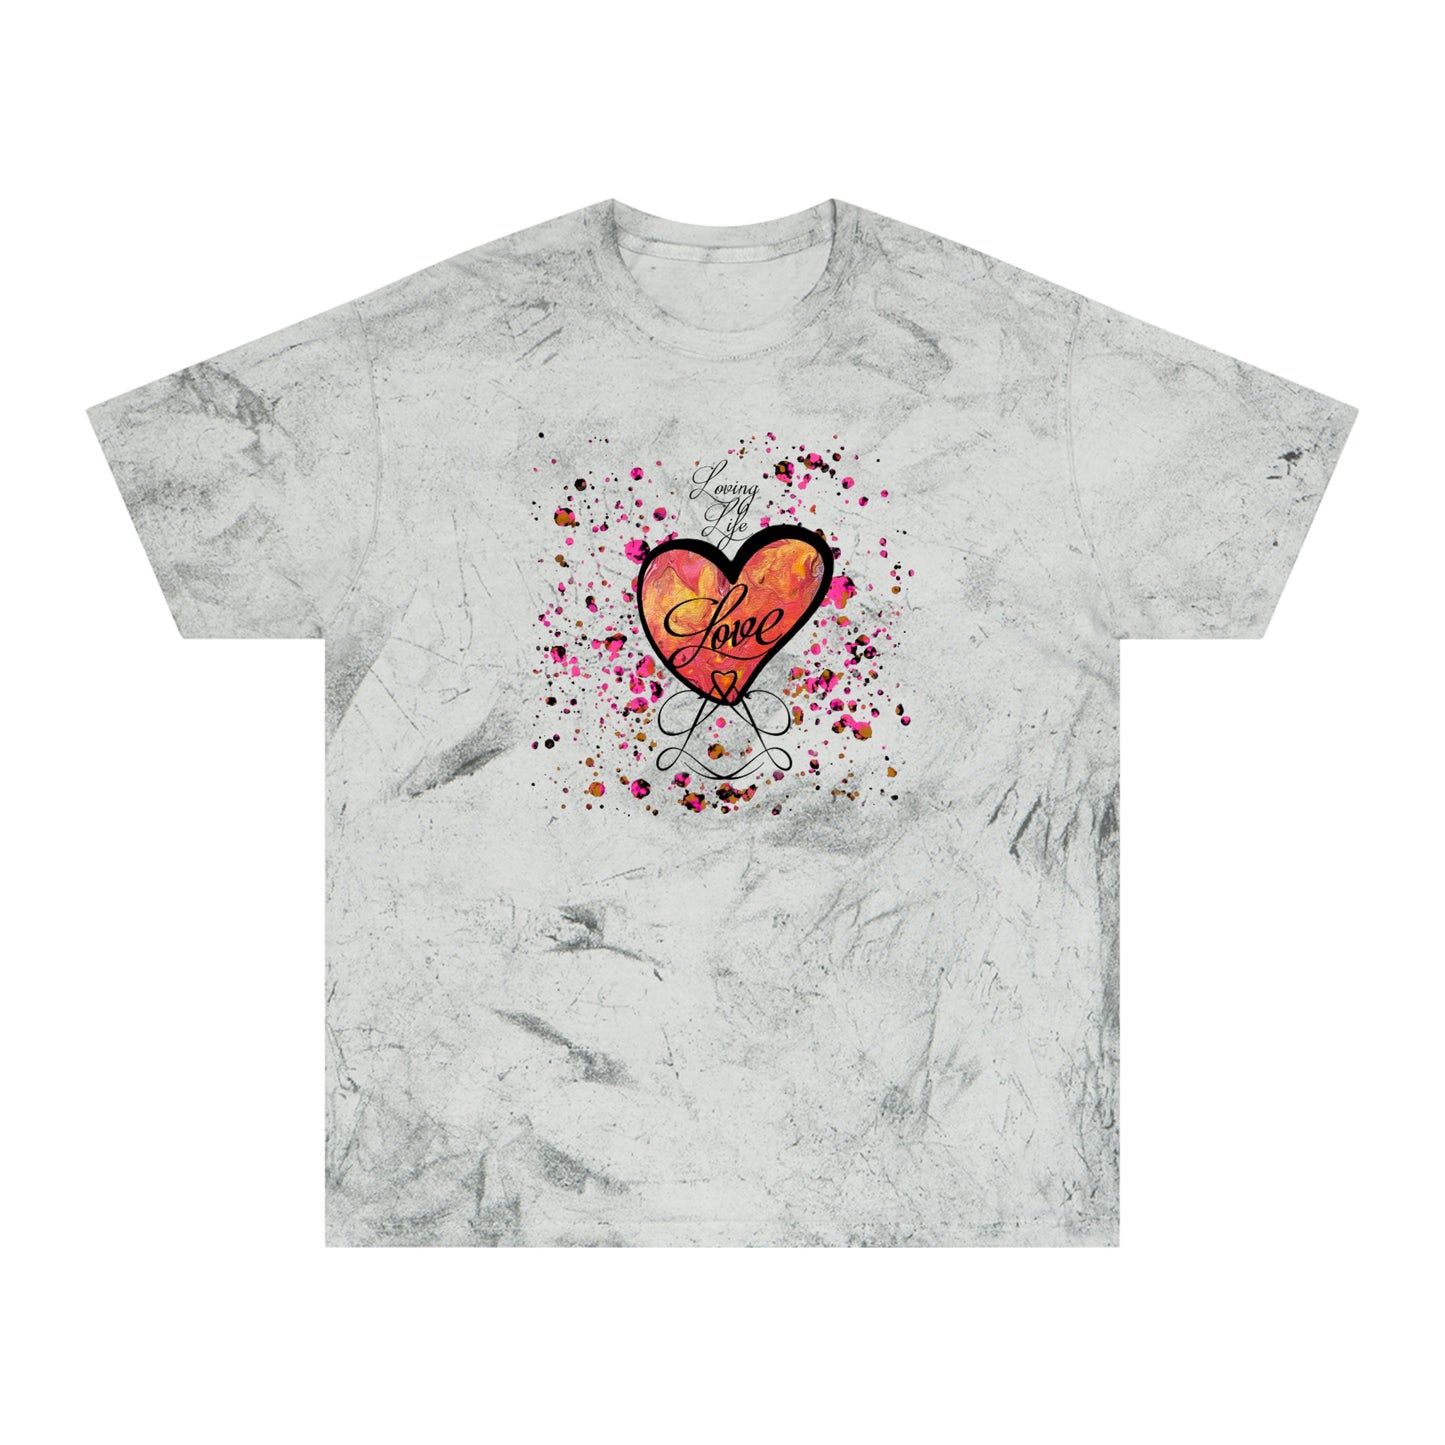 Stone-washed T-Shirt - LL/Love